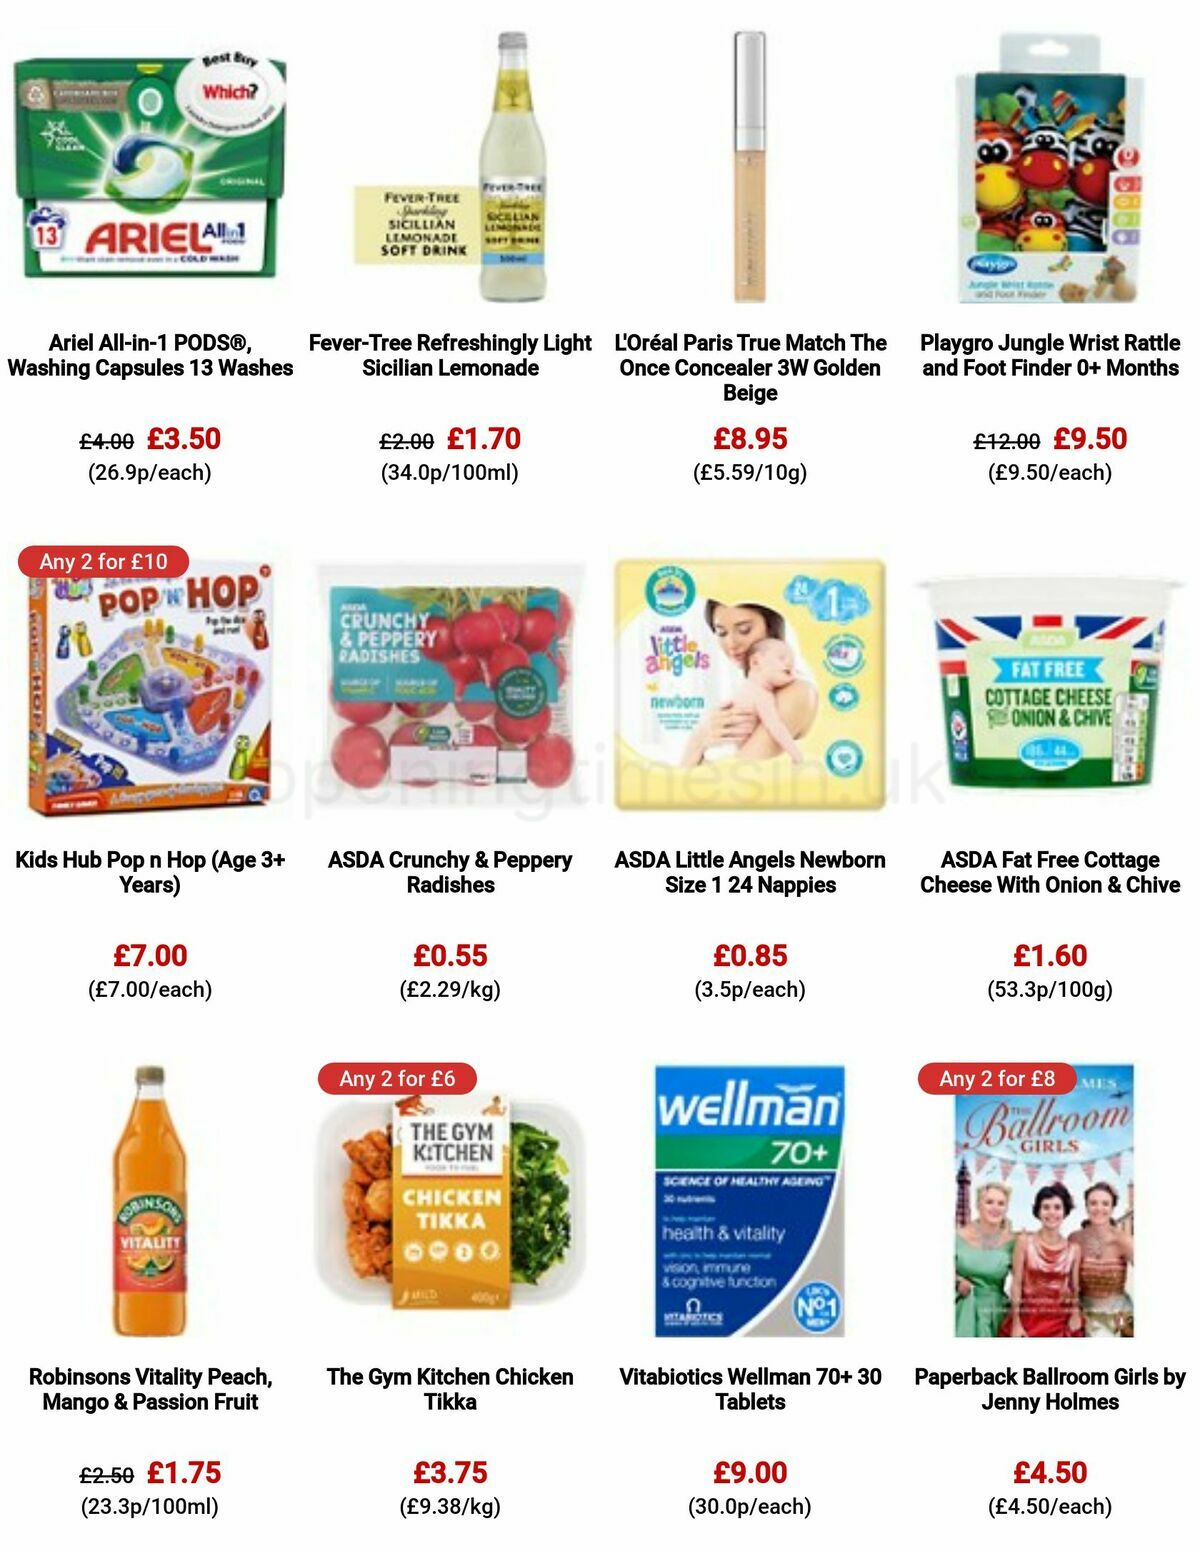 ASDA Offers from 9 June